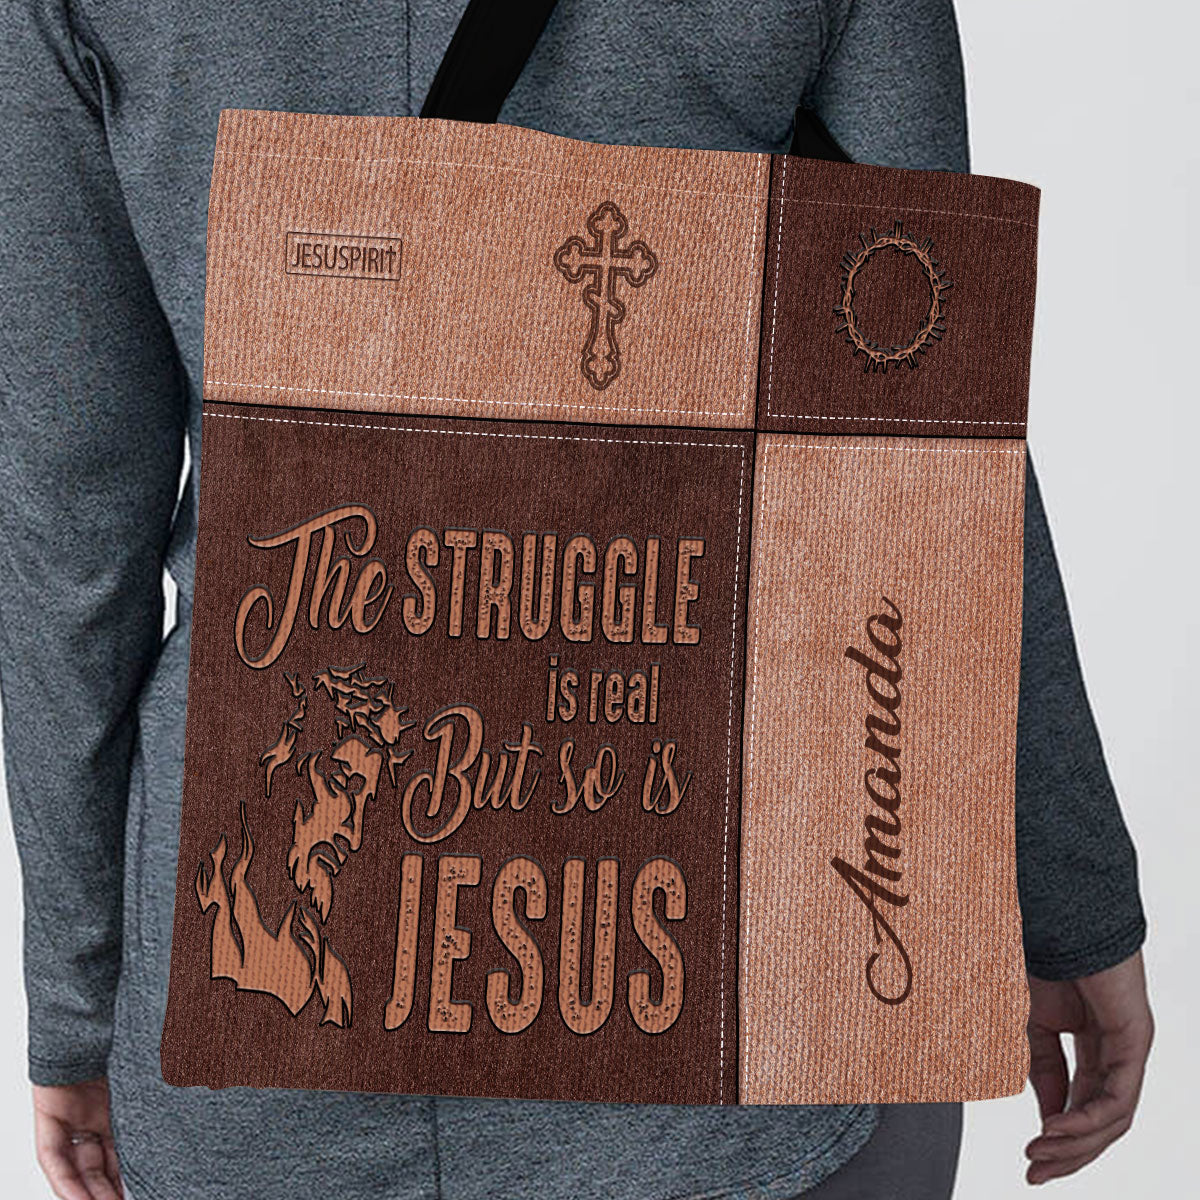 The Struggle Is Real But So Is Jesus - Special Personalized Tote Bag HM365